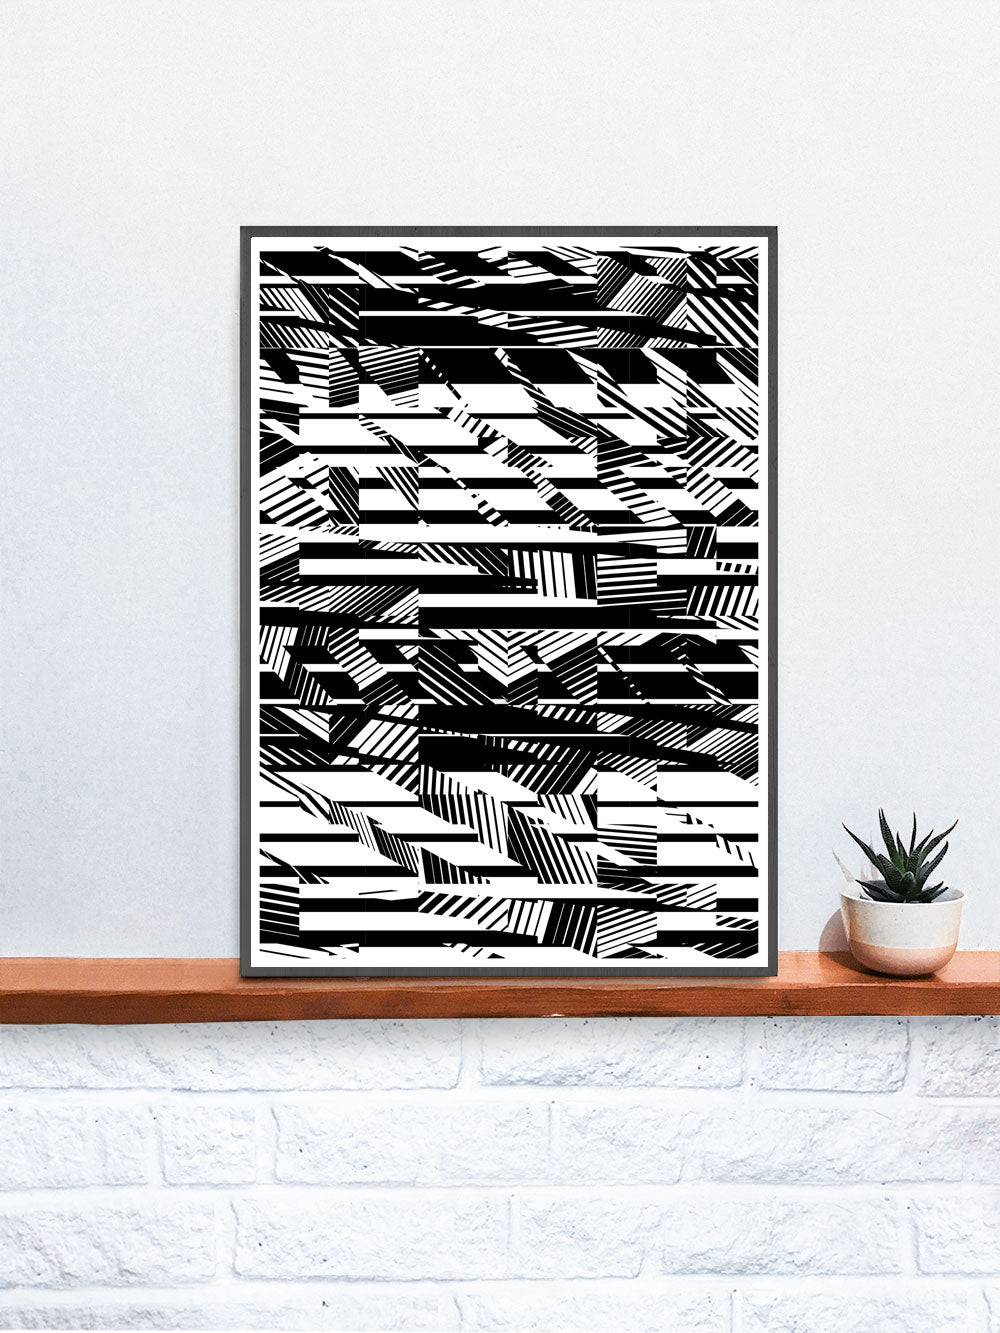 Fax Black and White Pattern Print on a shelf